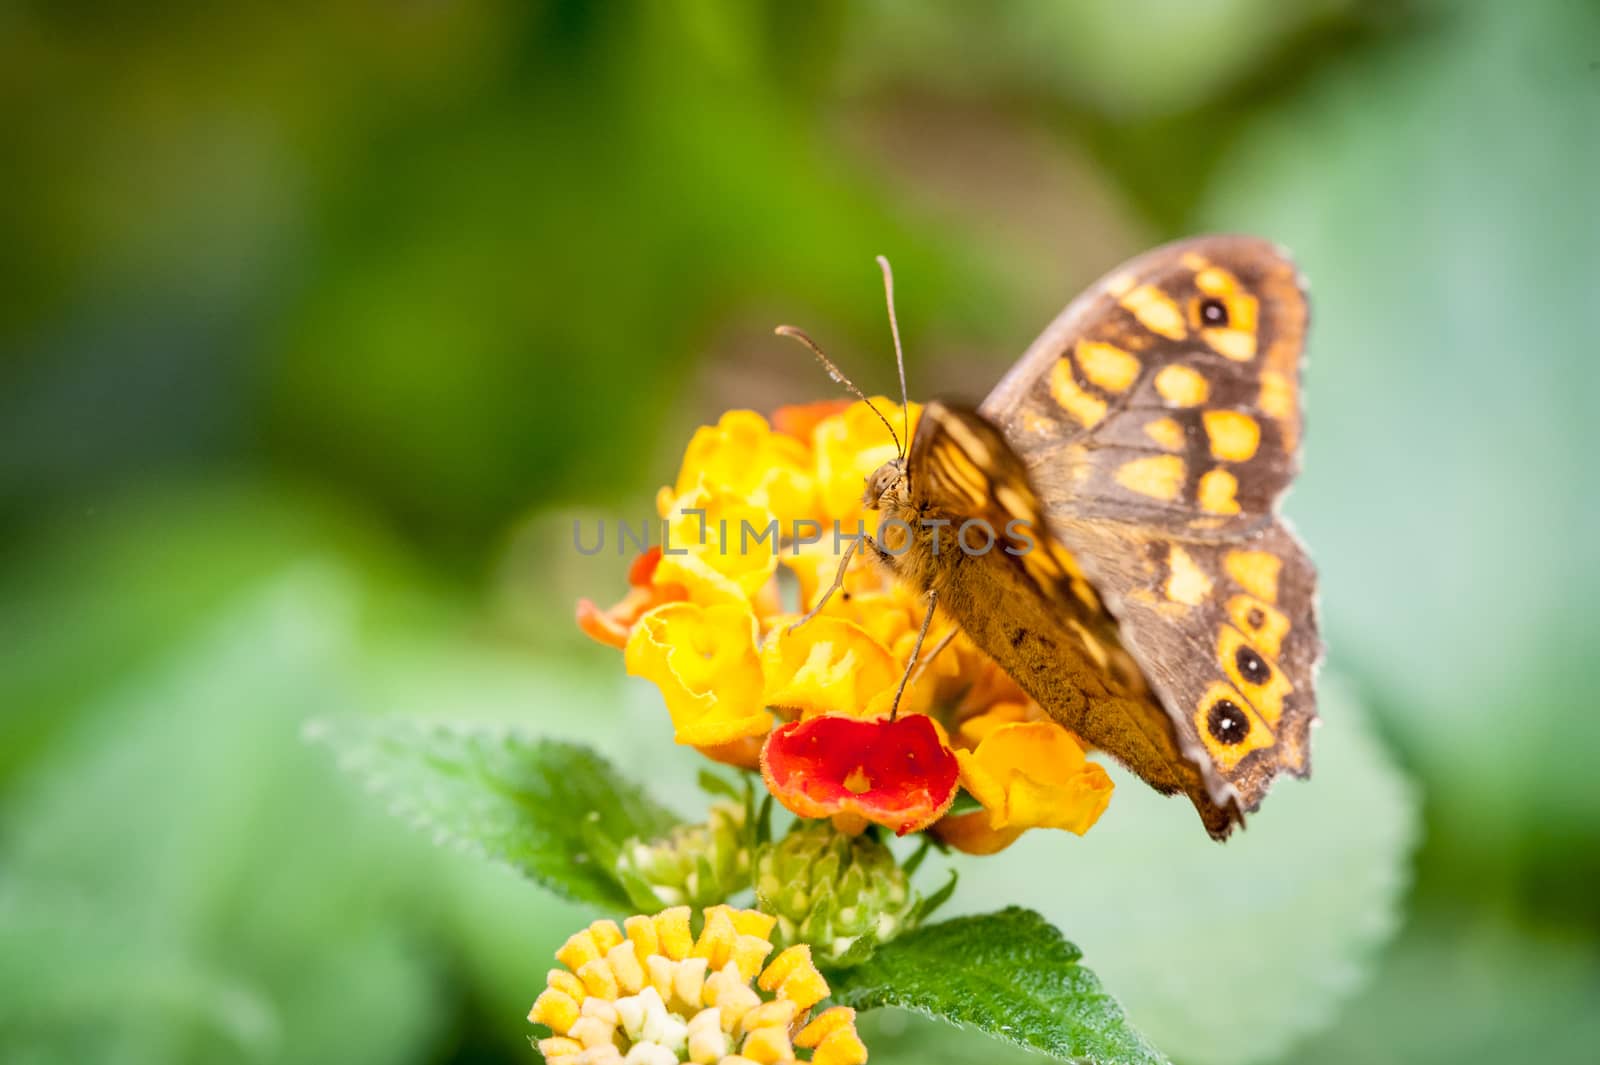 Butterfly taking pollen from a yellow flower in springtime